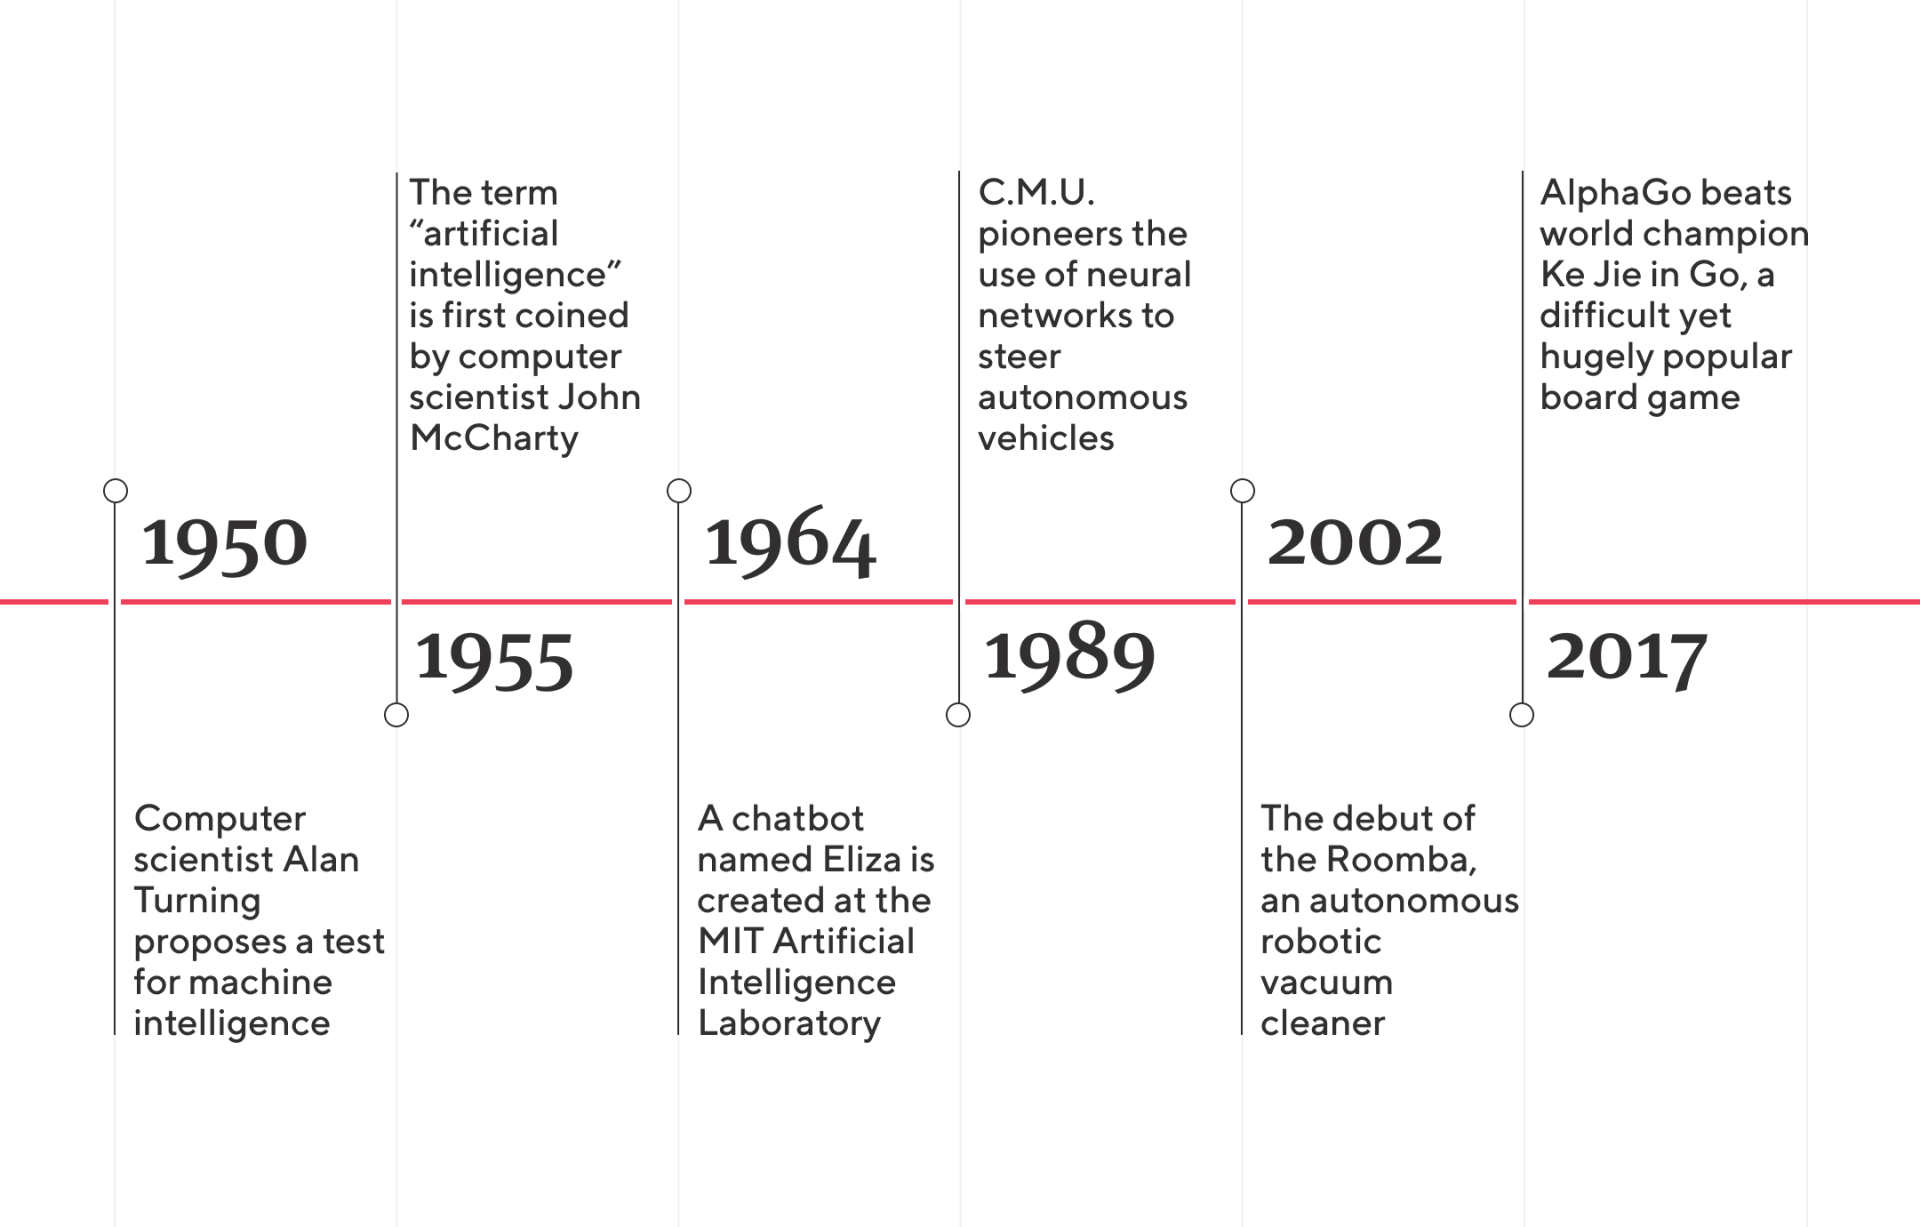 History of AI (source: https://gibsic.blog/2018/07/01/7-decades-of-artificial-intelligence-history-2morrowknight/)